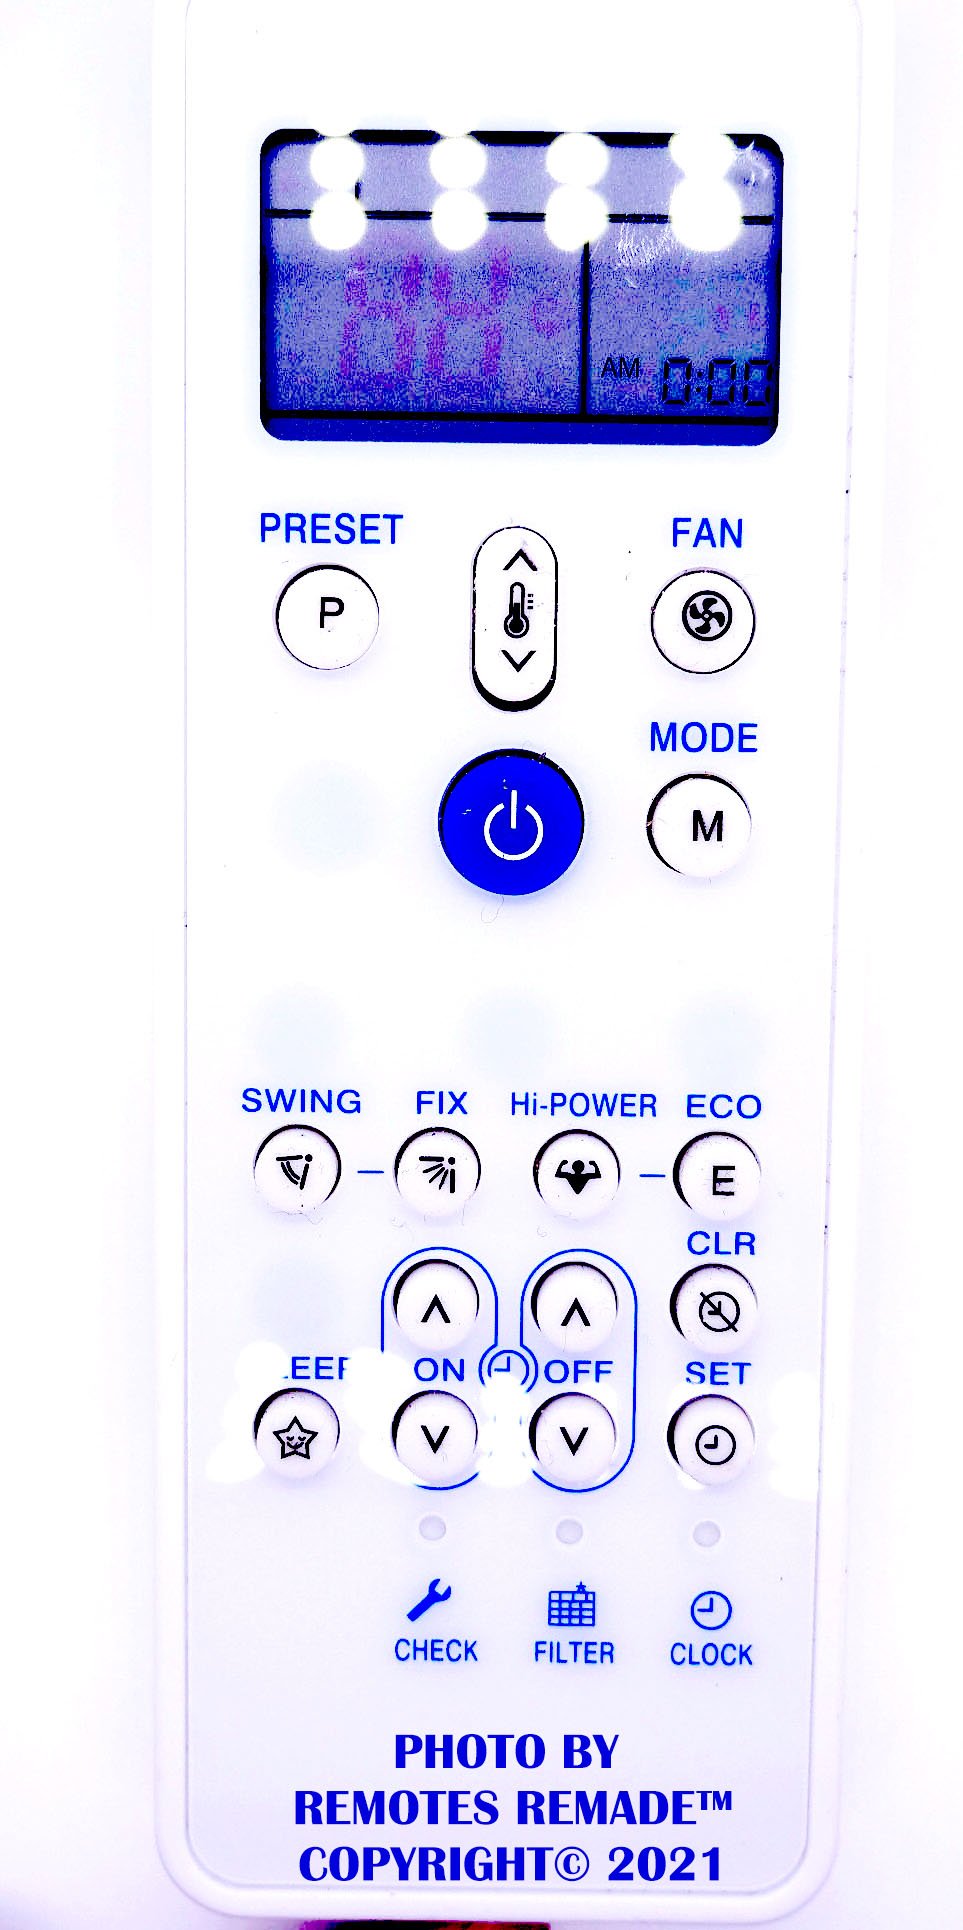 Air Con (A/C) Remote Controller for Carrier Air Conditioner Controls